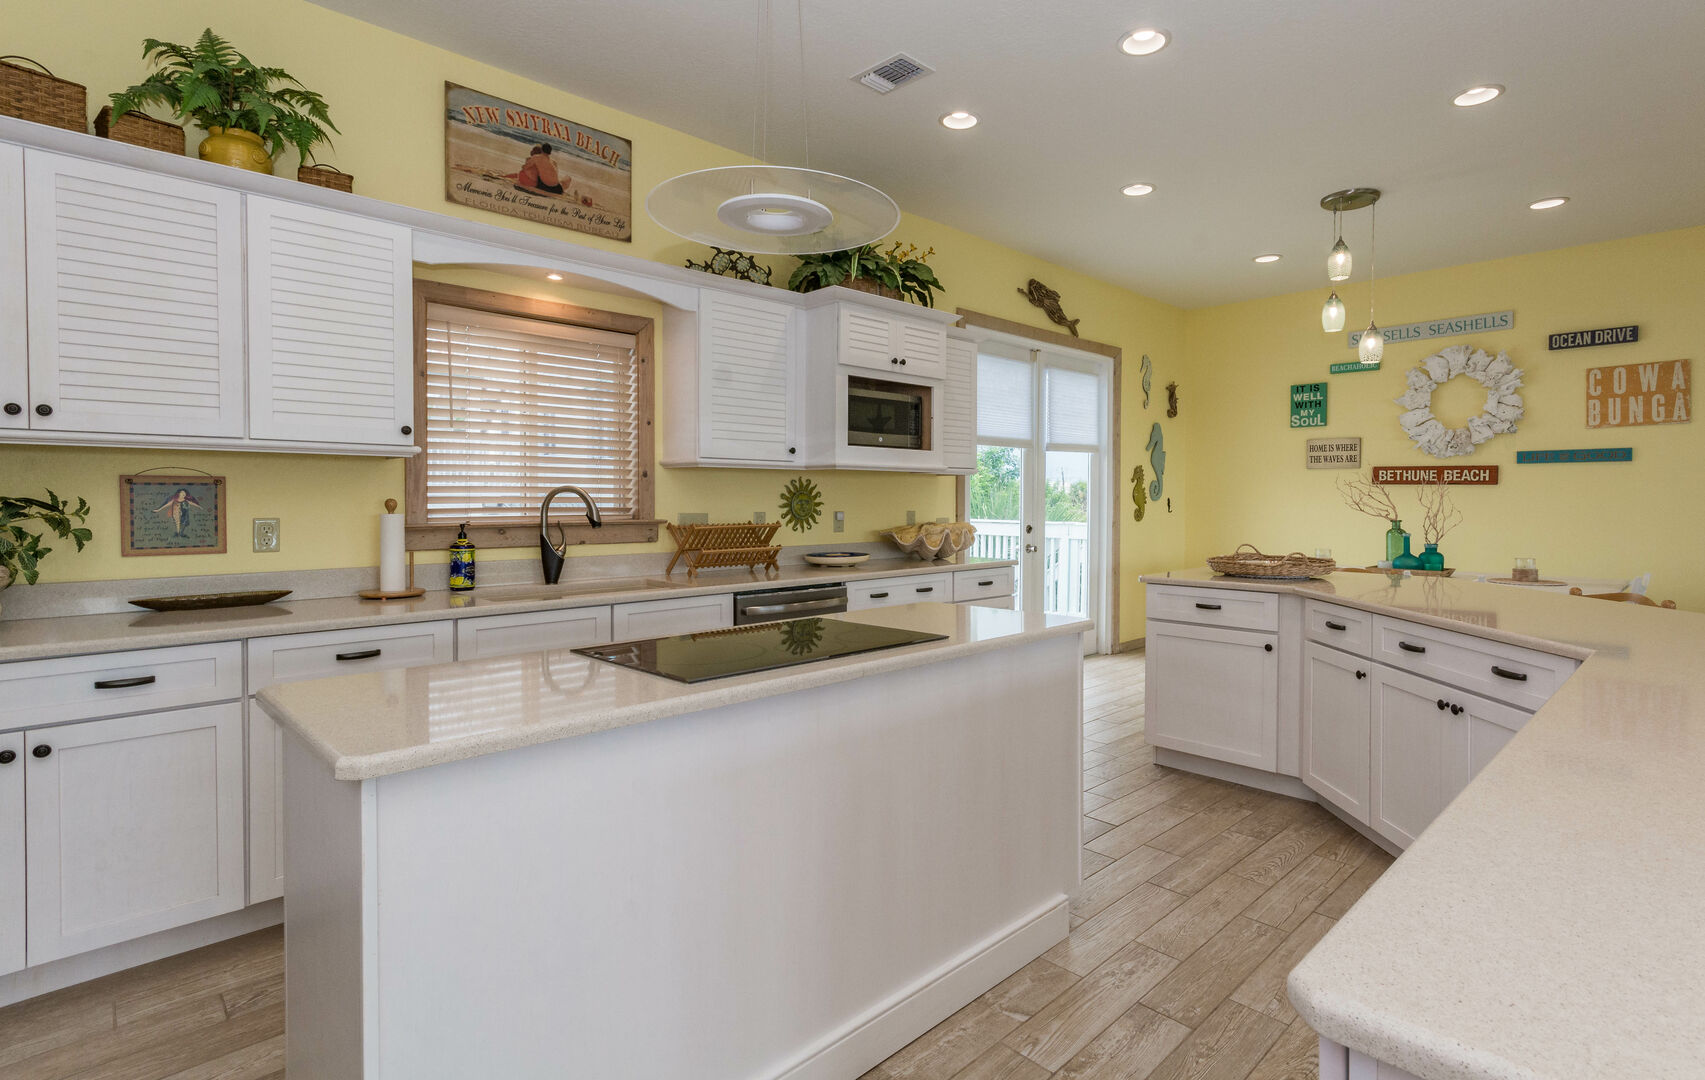 Fully equipped kitchen with additional seating at the kitchen counter.